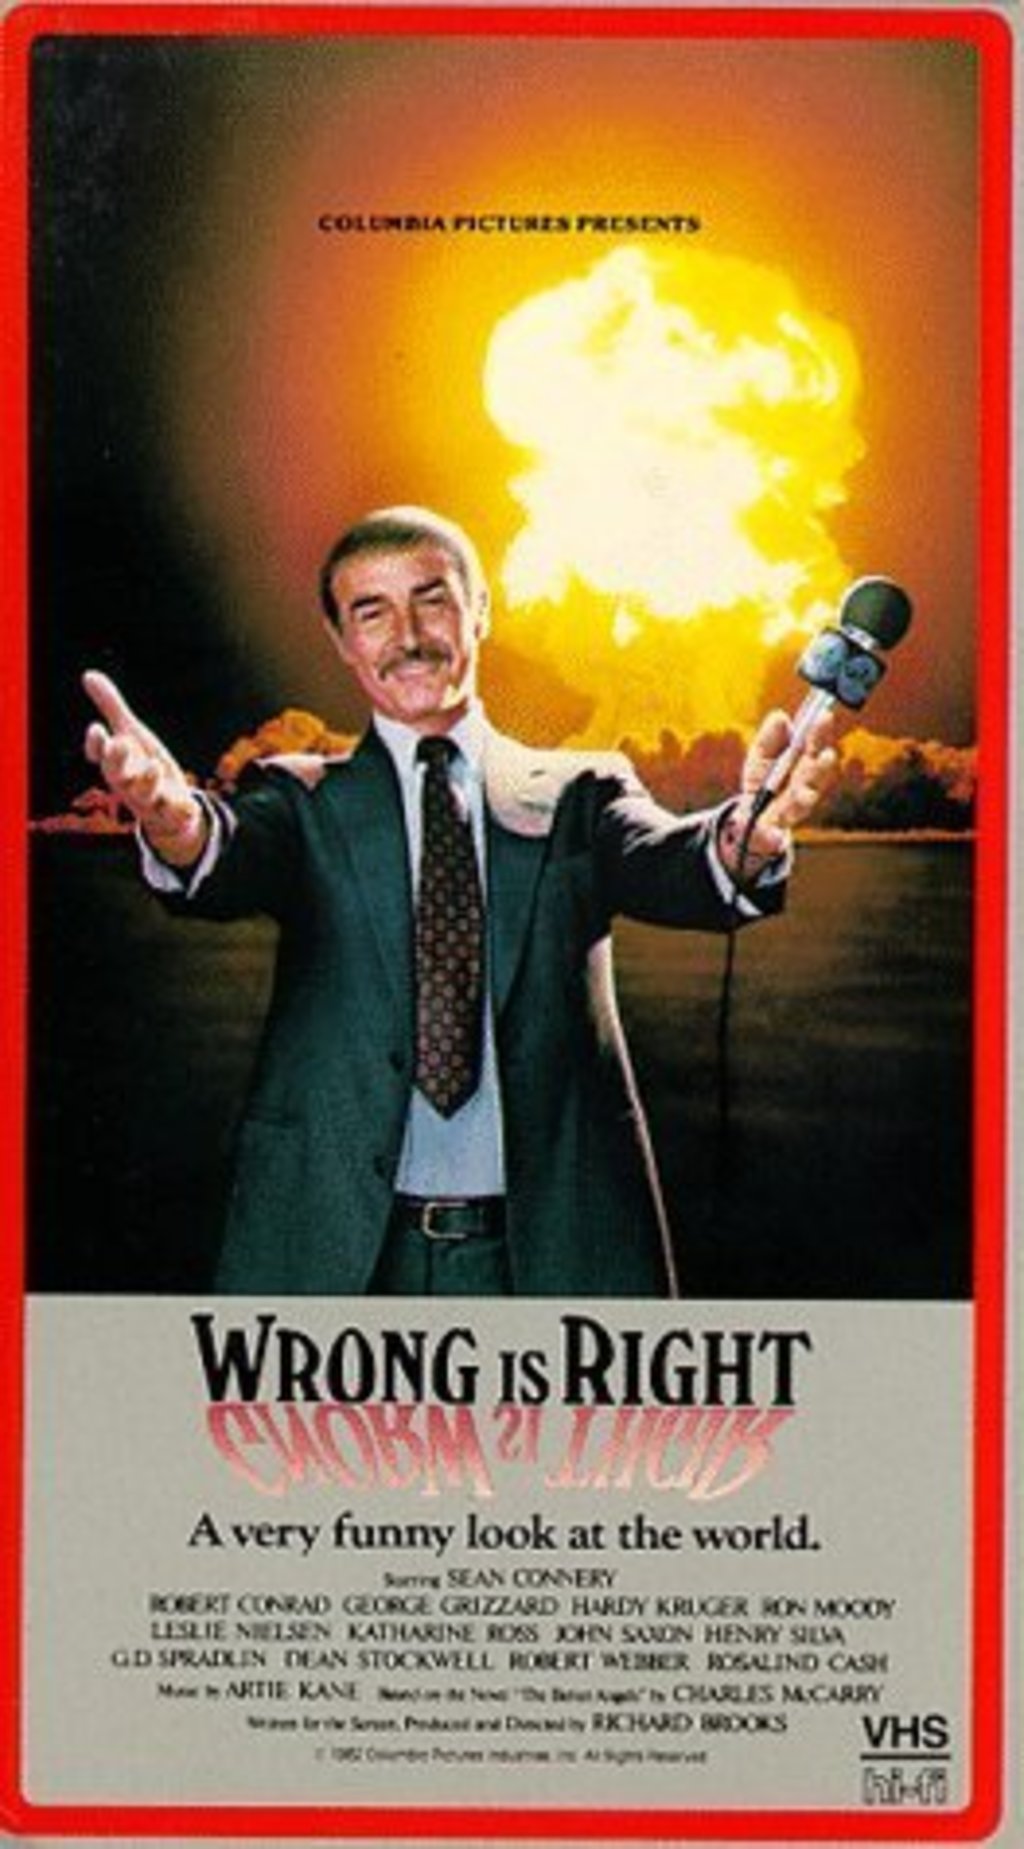 Watch Wrong Is Right on Netflix Today! | NetflixMovies.com1024 x 1849